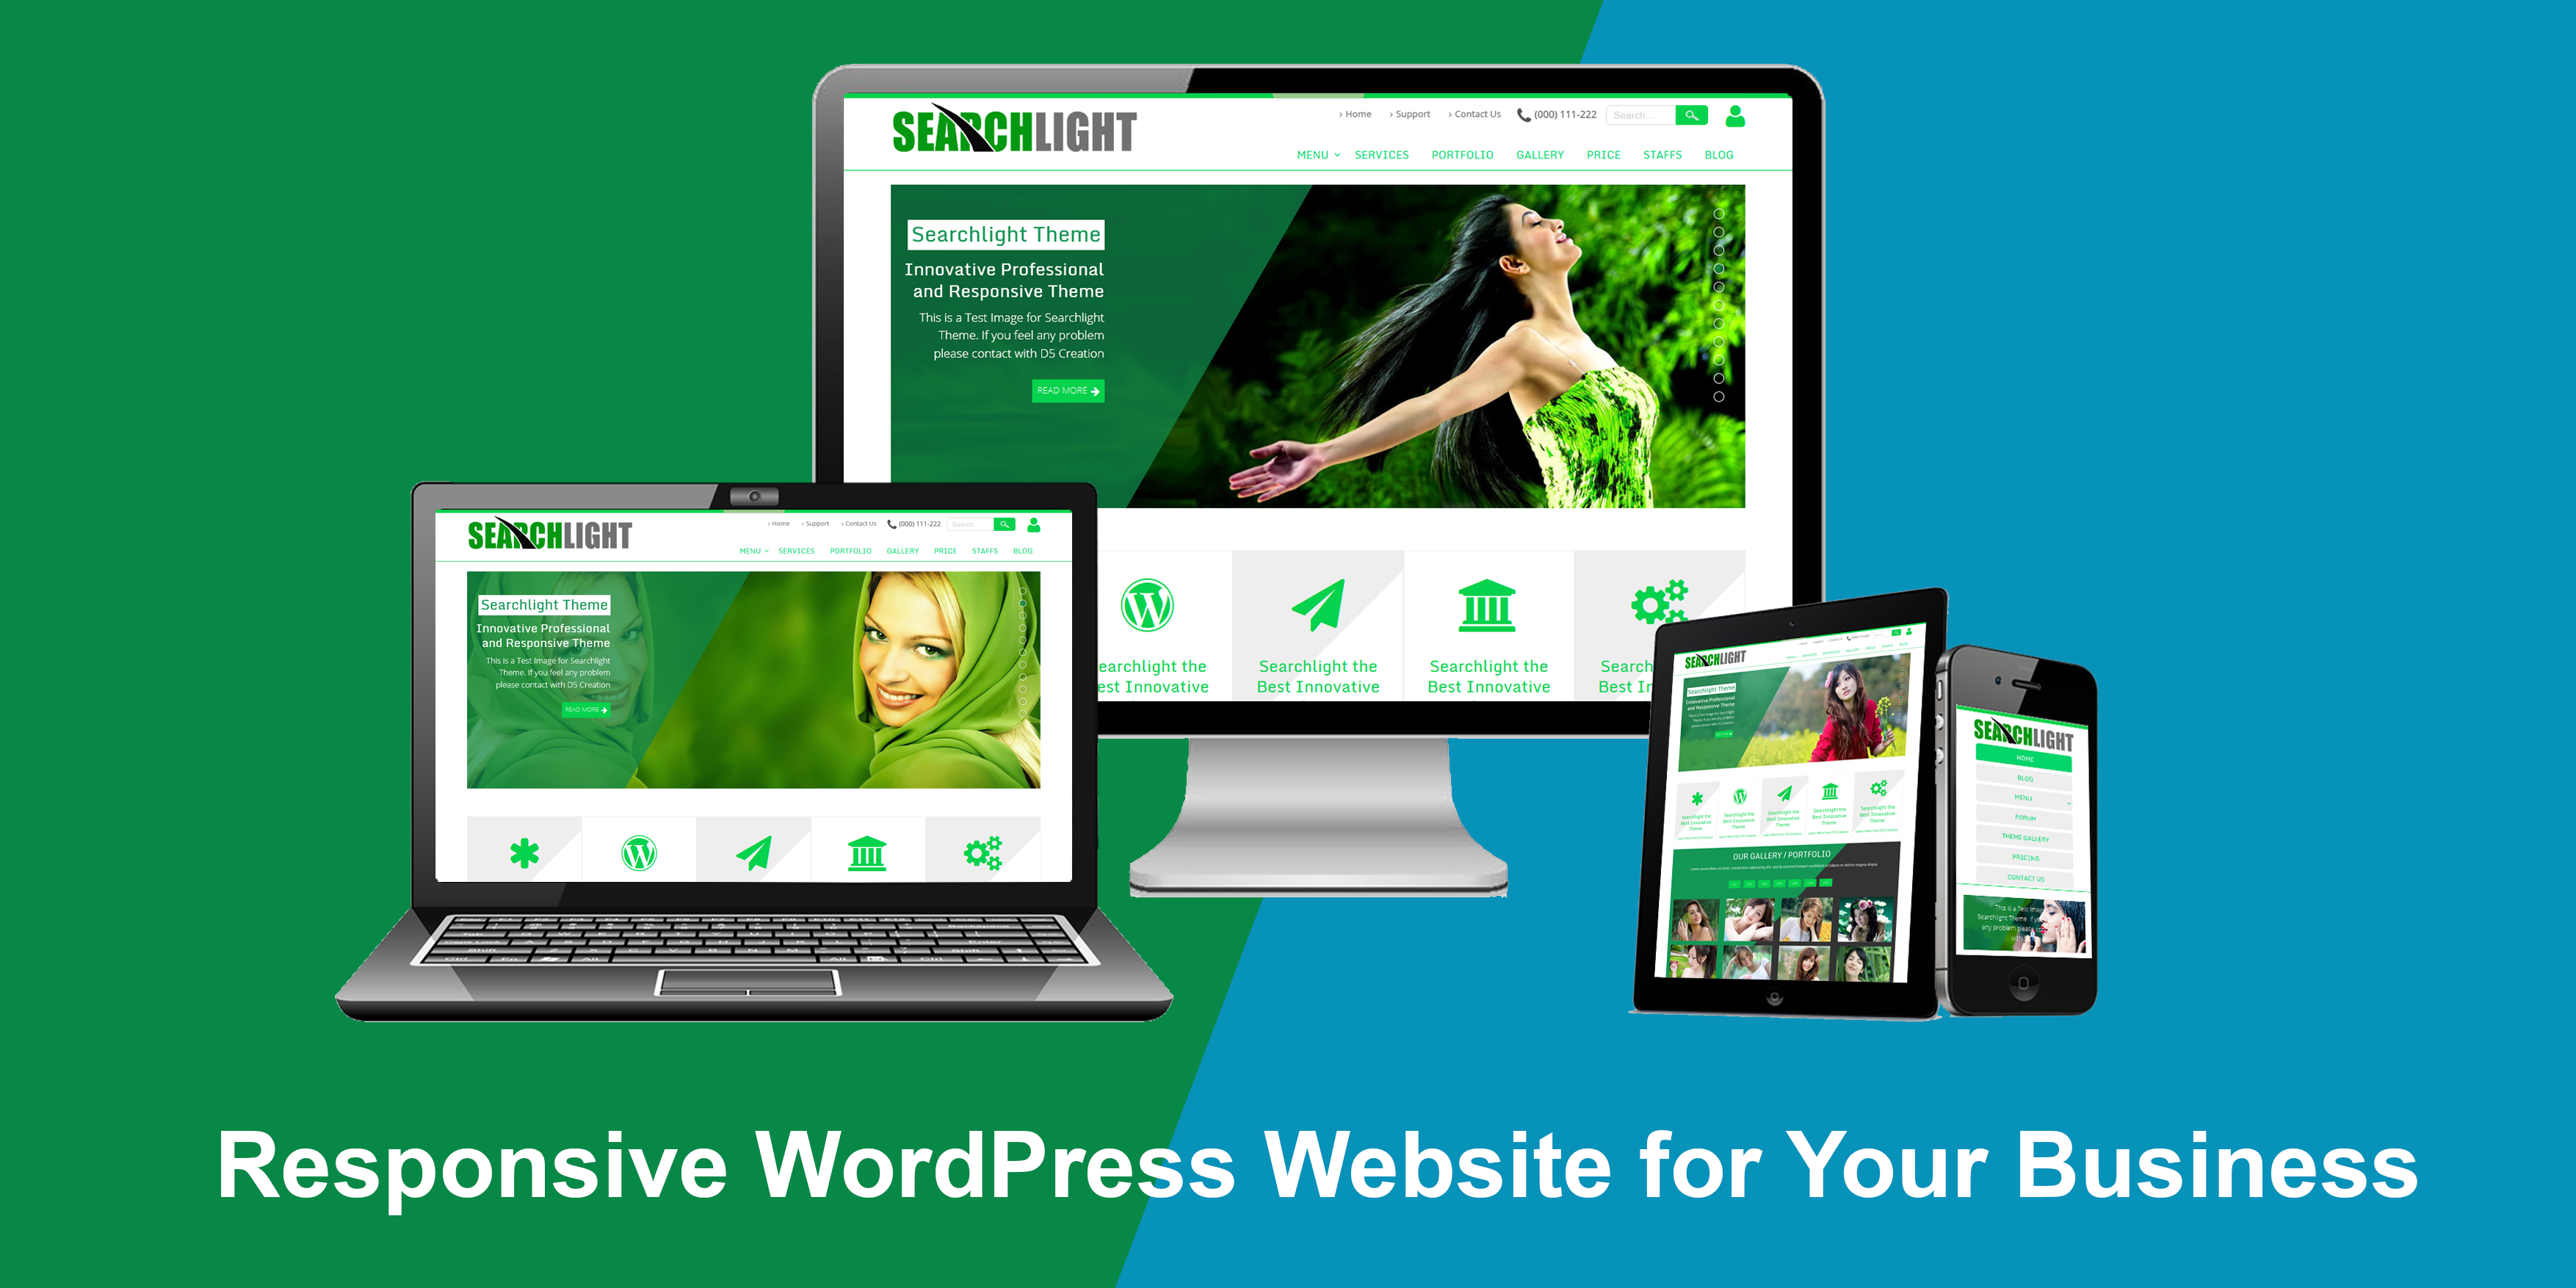 Why do you need Responsive WordPress Website for your